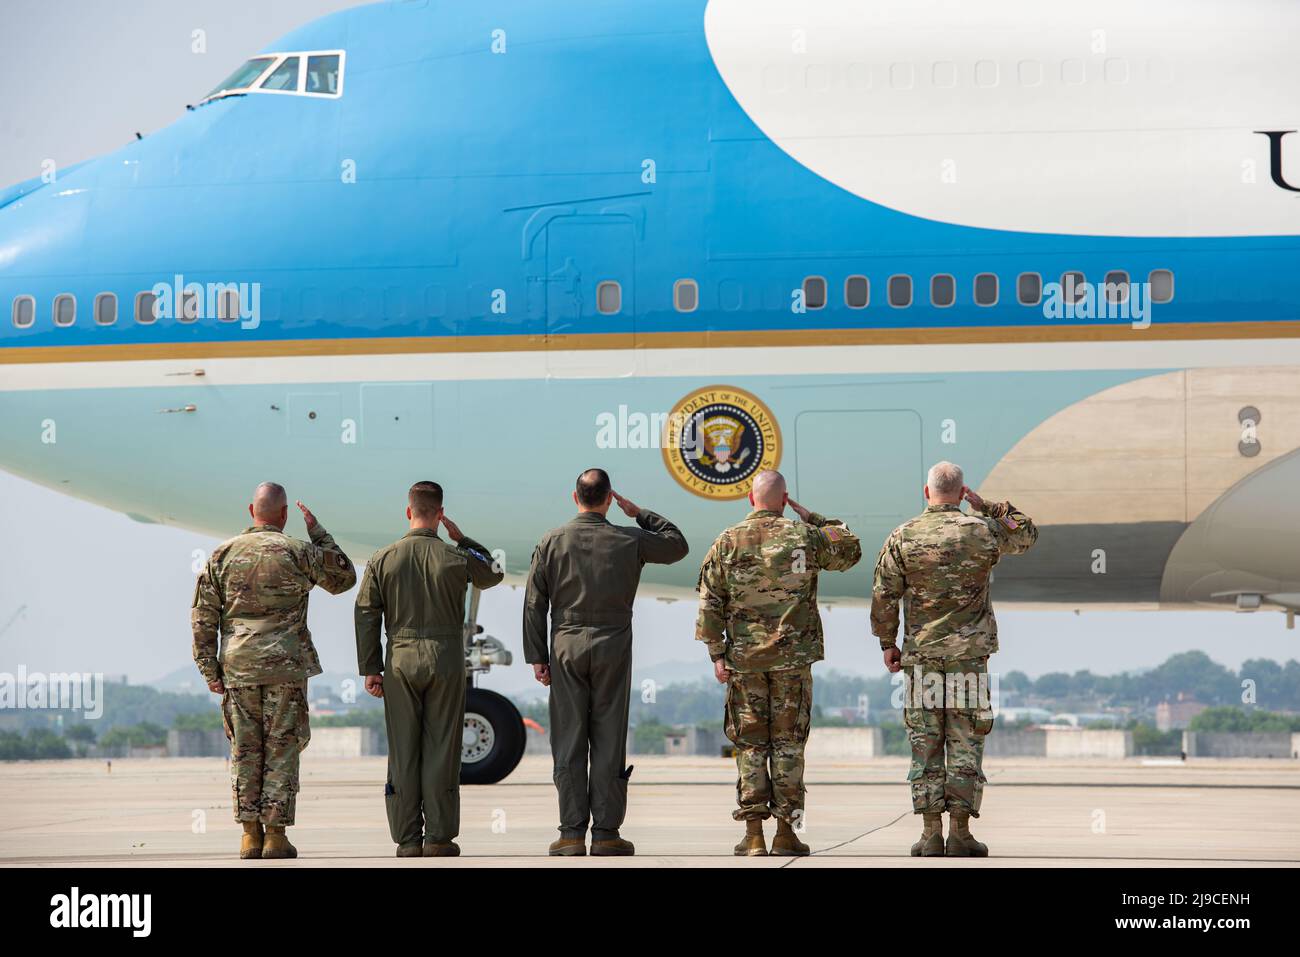 Pyeongtaek, South Korea. 22nd May, 2022. U.S Senior military leaders salute as Air Force One carrying President Joe Biden, departs from Osan Air Base following his two-day visit to South Korea, May 22, 2022 in Pyeongtaek, South Korea. Credit: SrA Allison Payne/U.S. Air Force/Alamy Live News Stock Photo